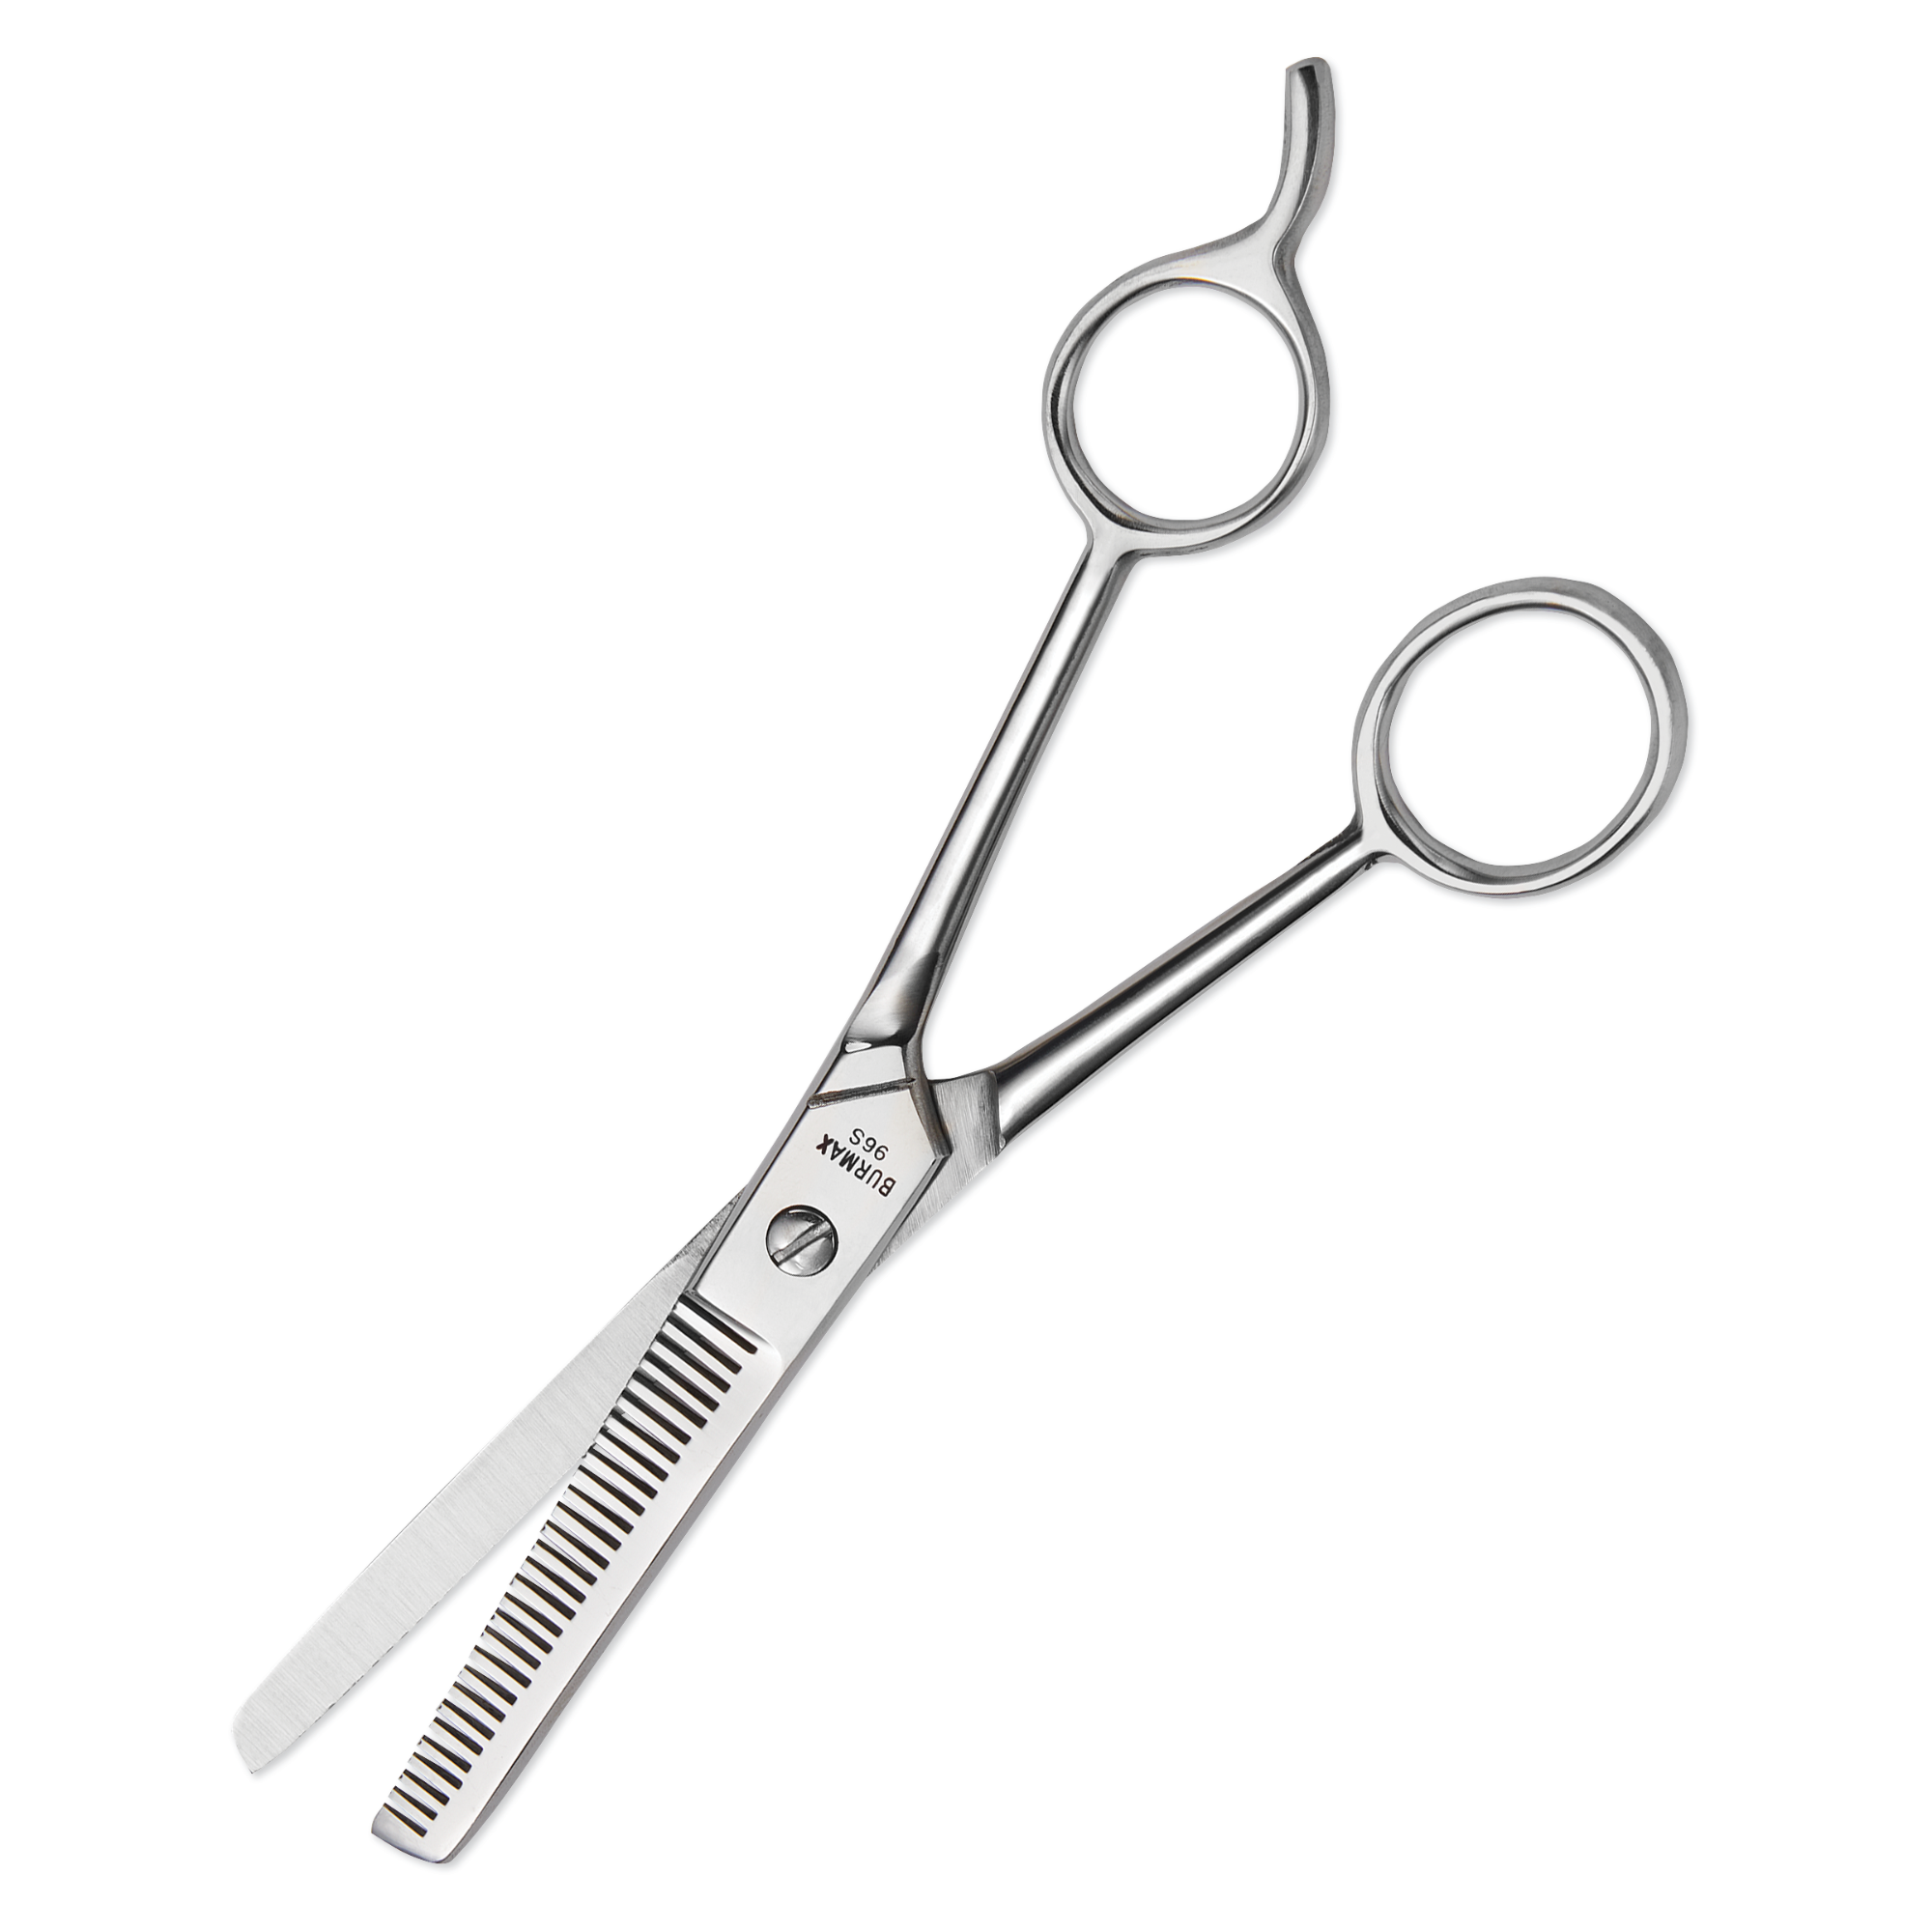 7-1/4" Single Tooth Thinning Shear